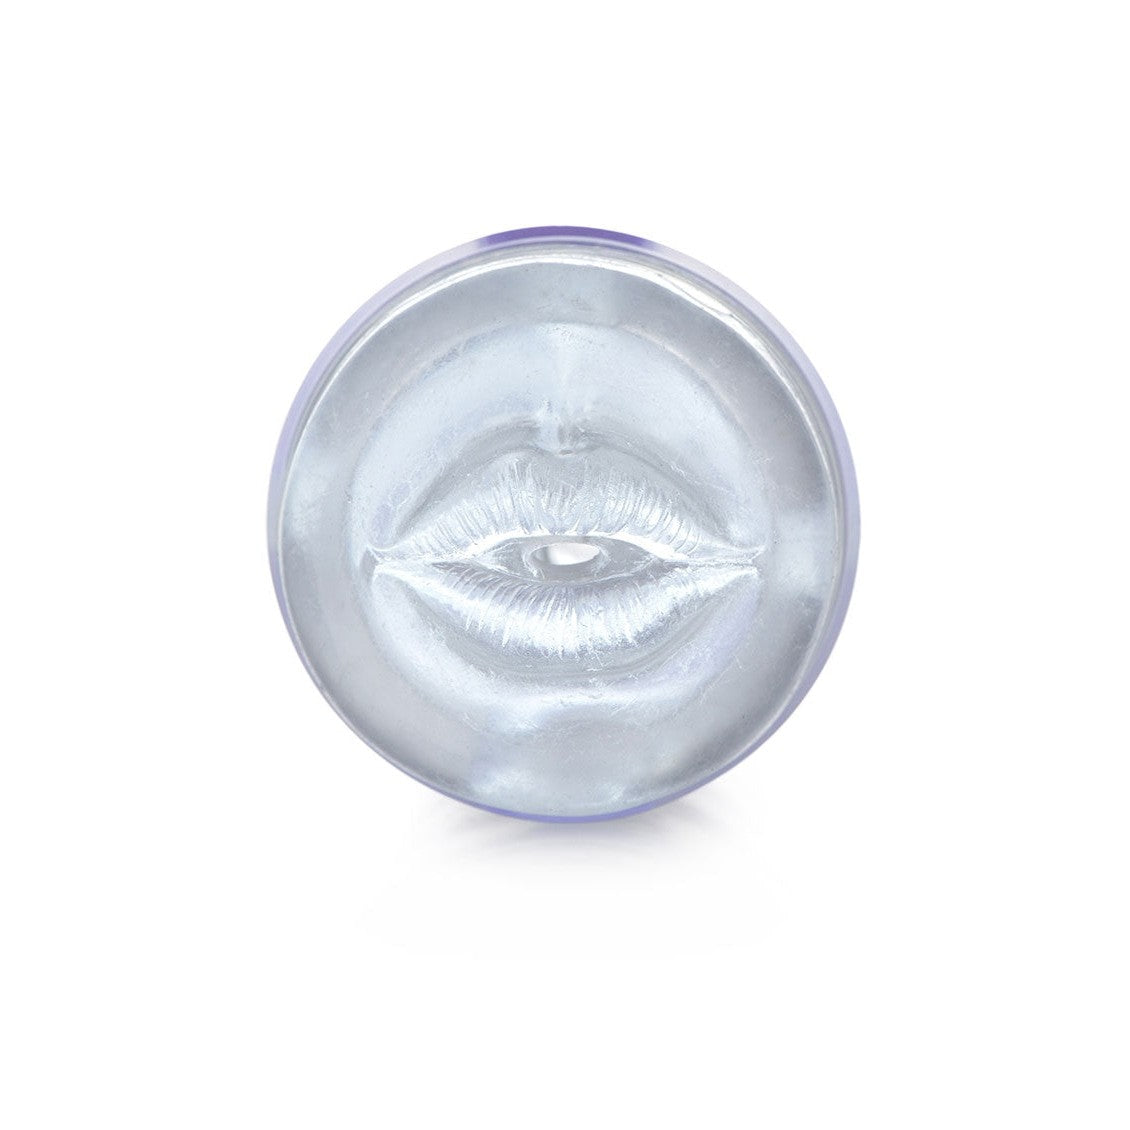 Mistress Deluxe Clear Mouth Stroker Intimates Adult Boutique